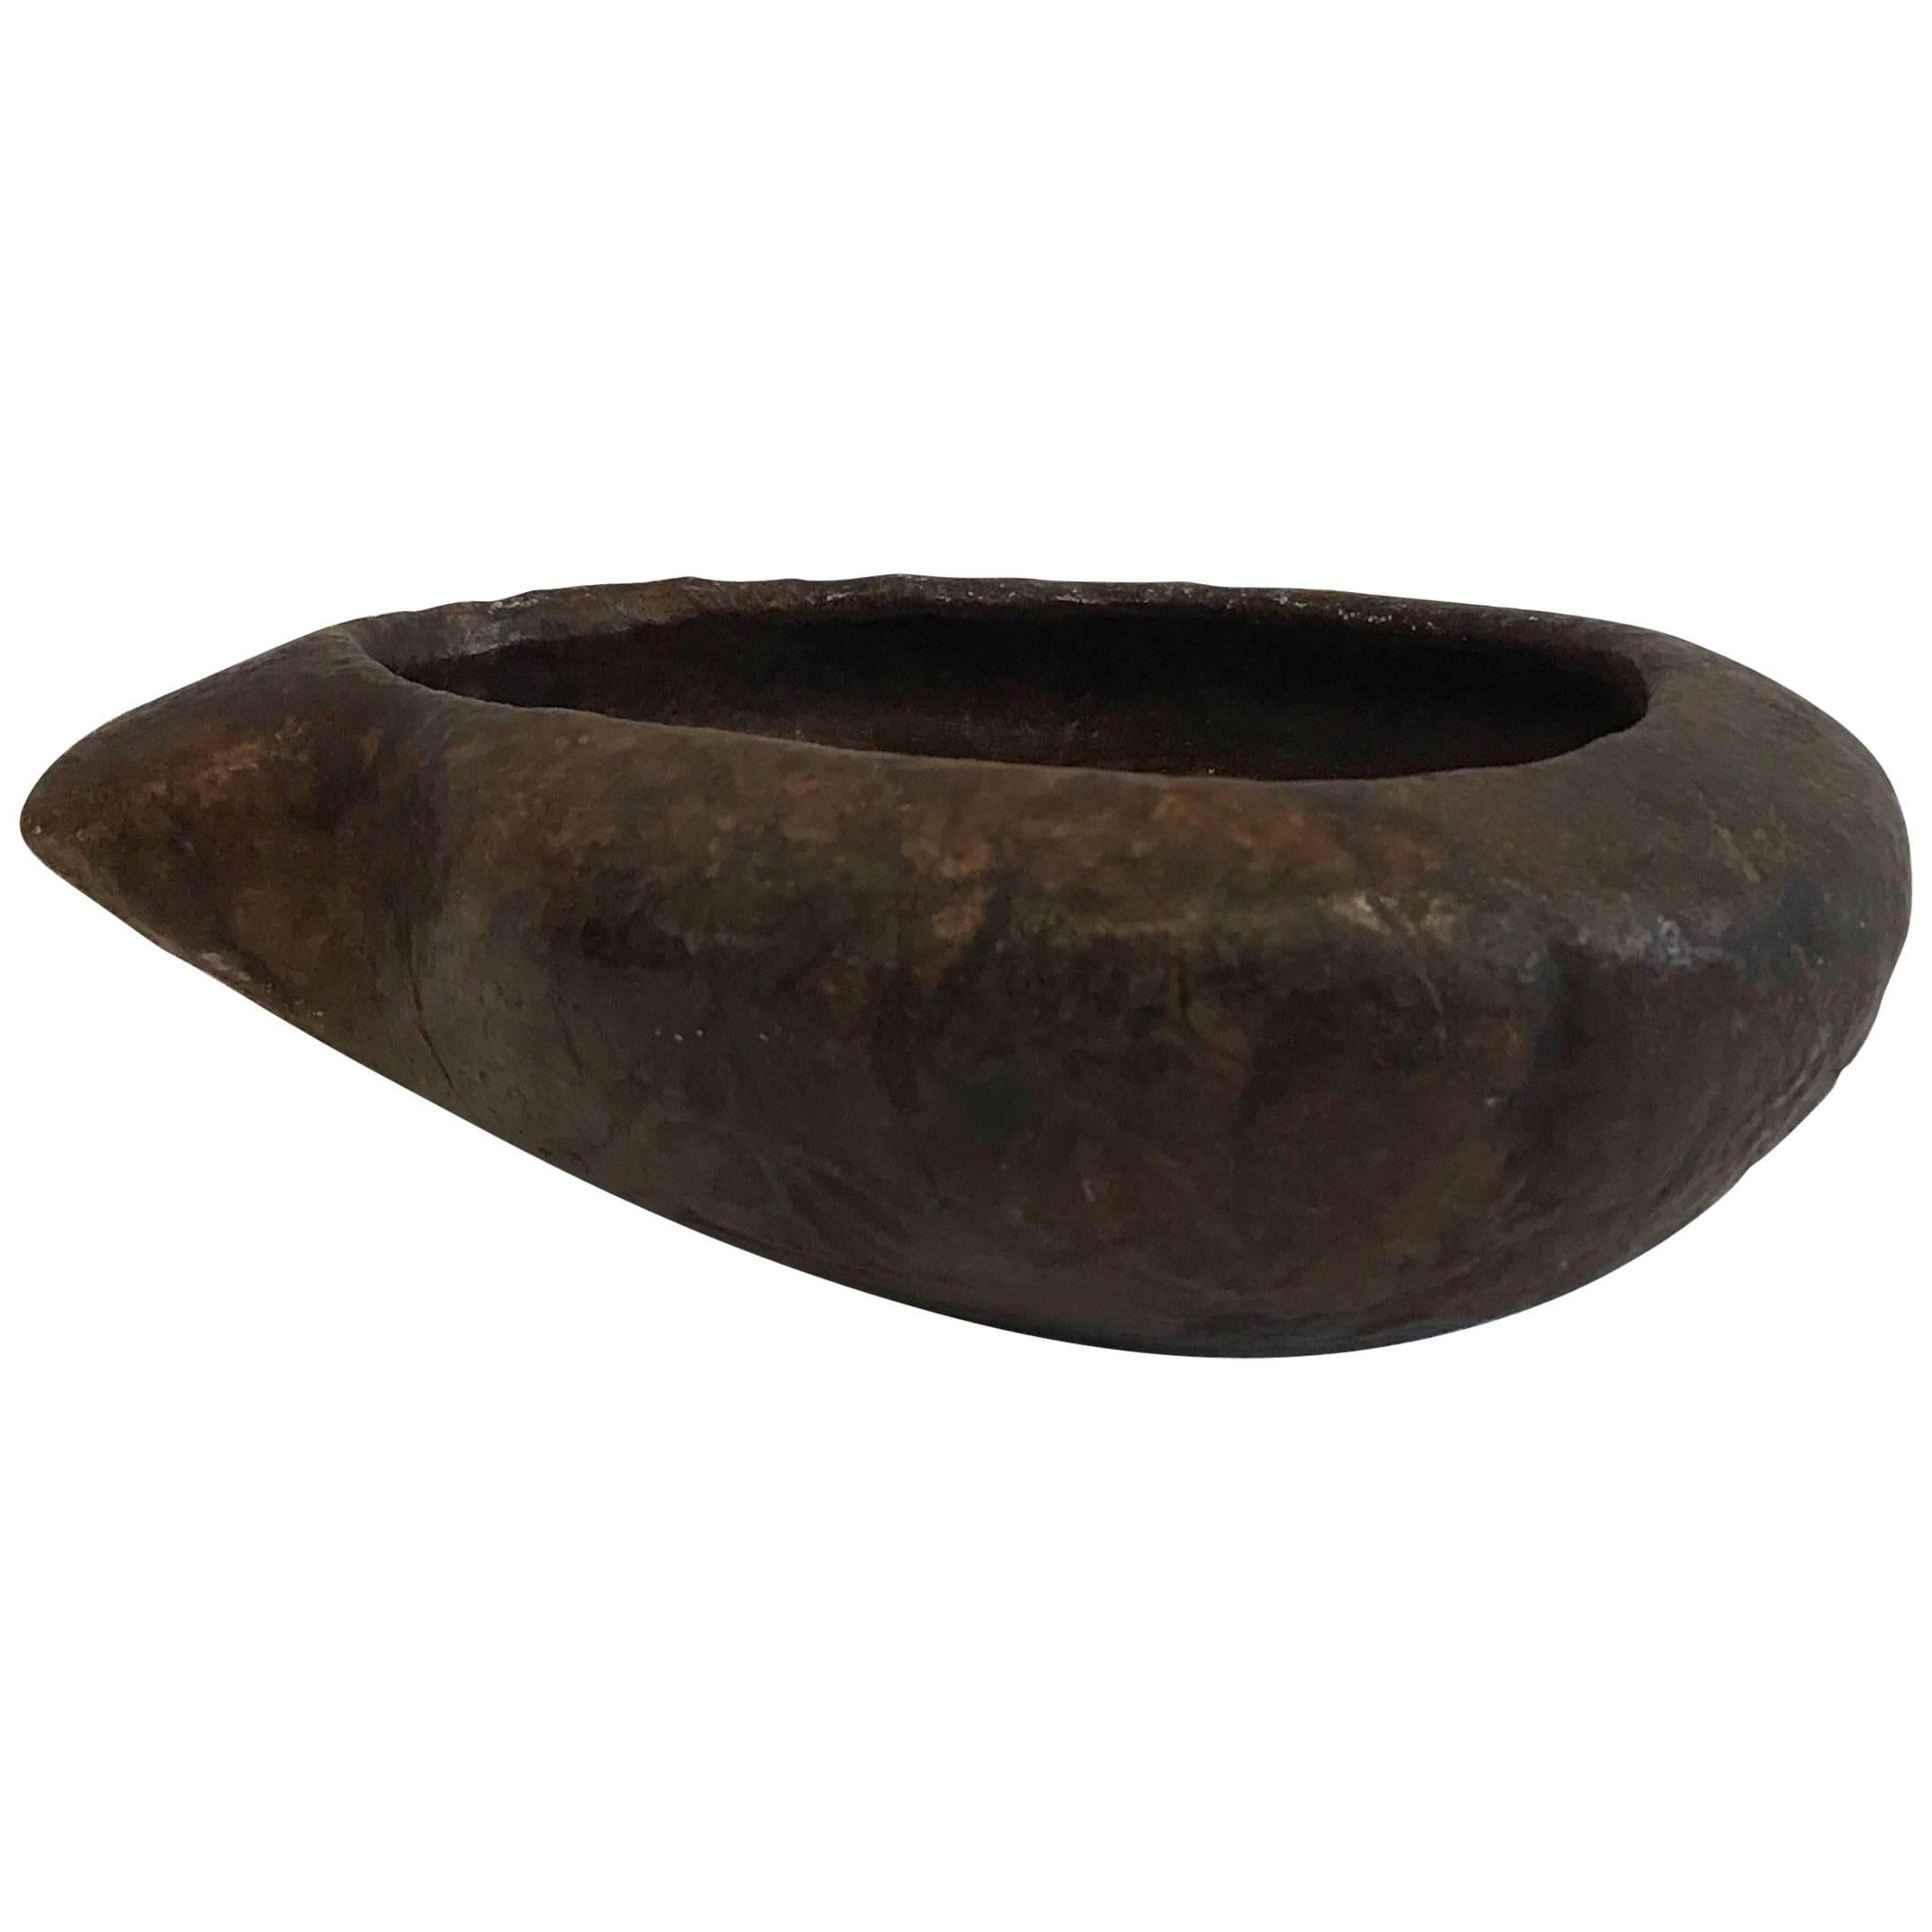 Early 20th Century Hand-Carved Brazilian Soap Stone Bowl